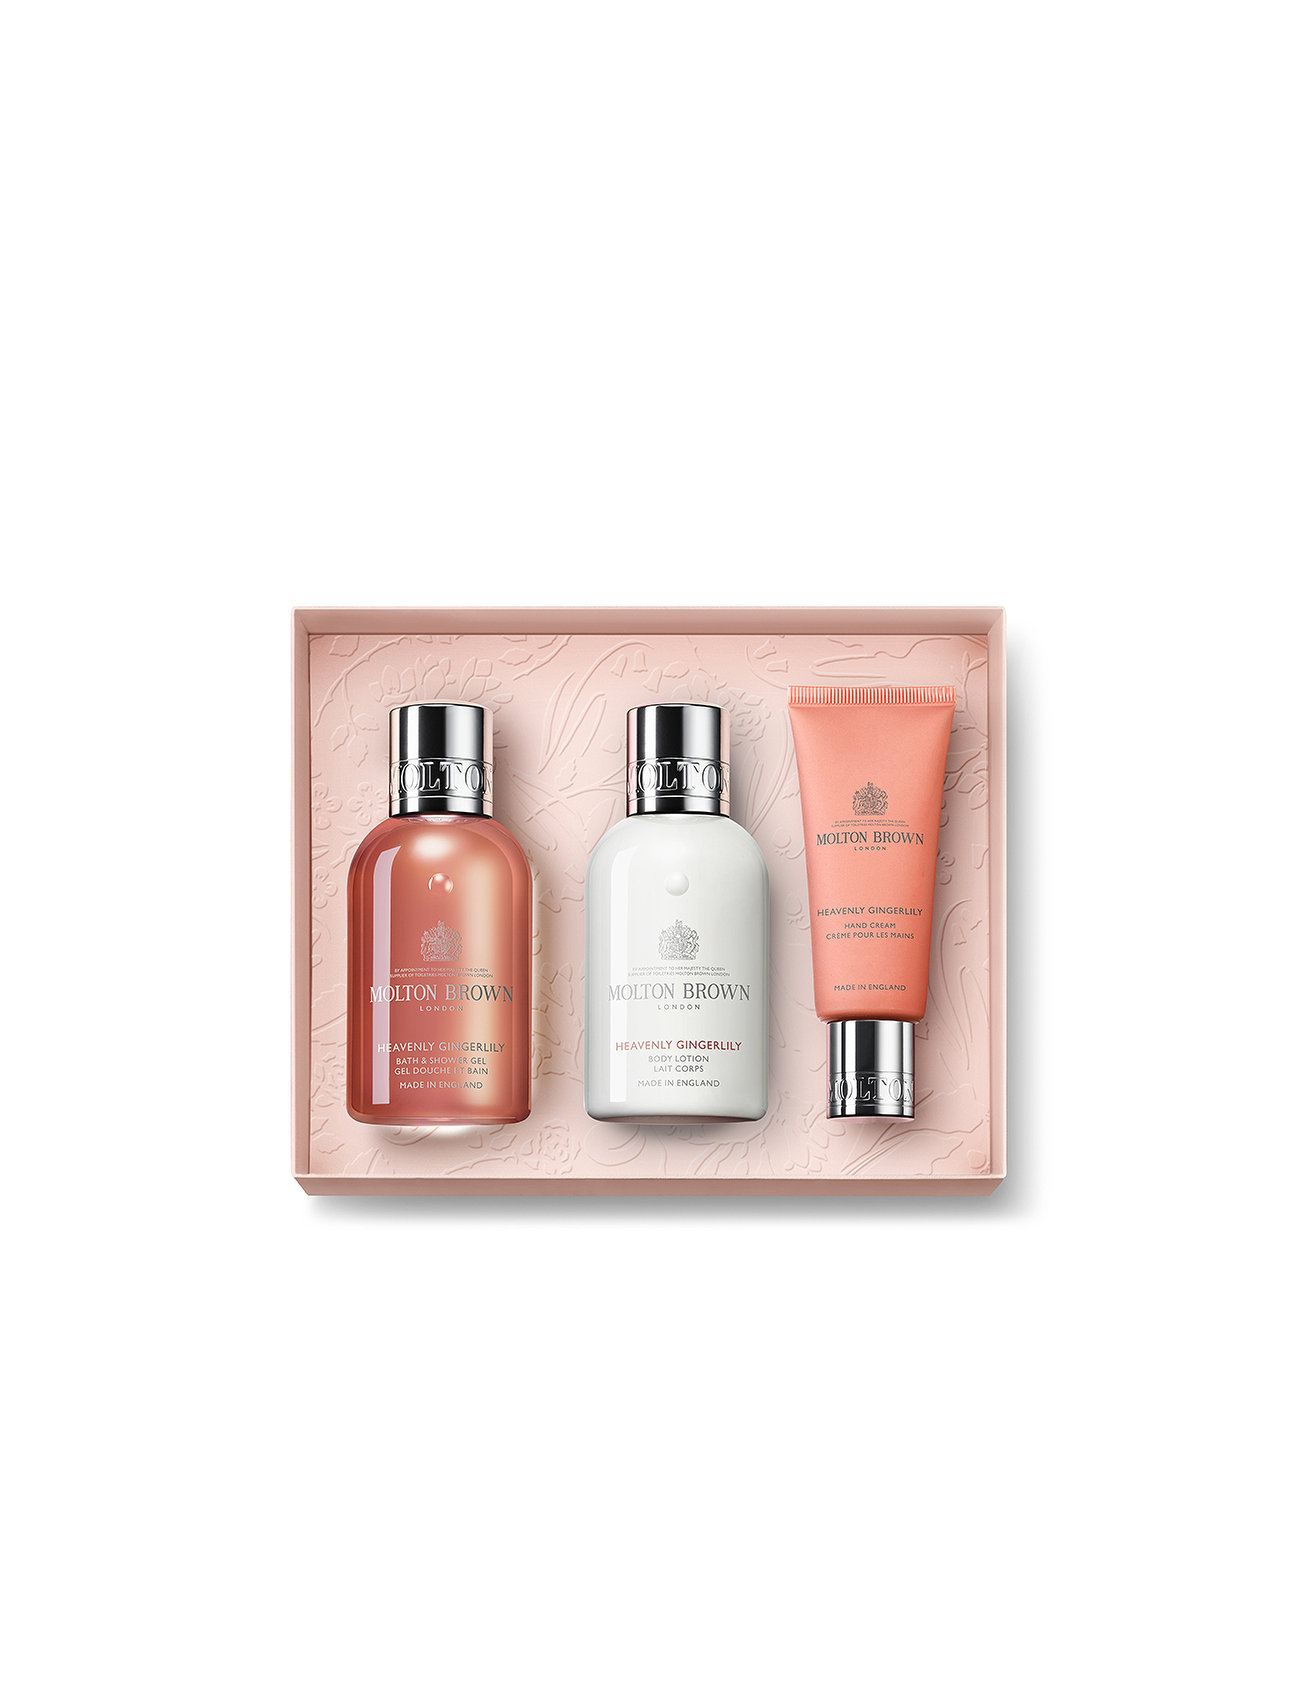 Gift Set Heavenly Gingerlily Travel Body & Hand Set Bath & Body Nude Molton Brown